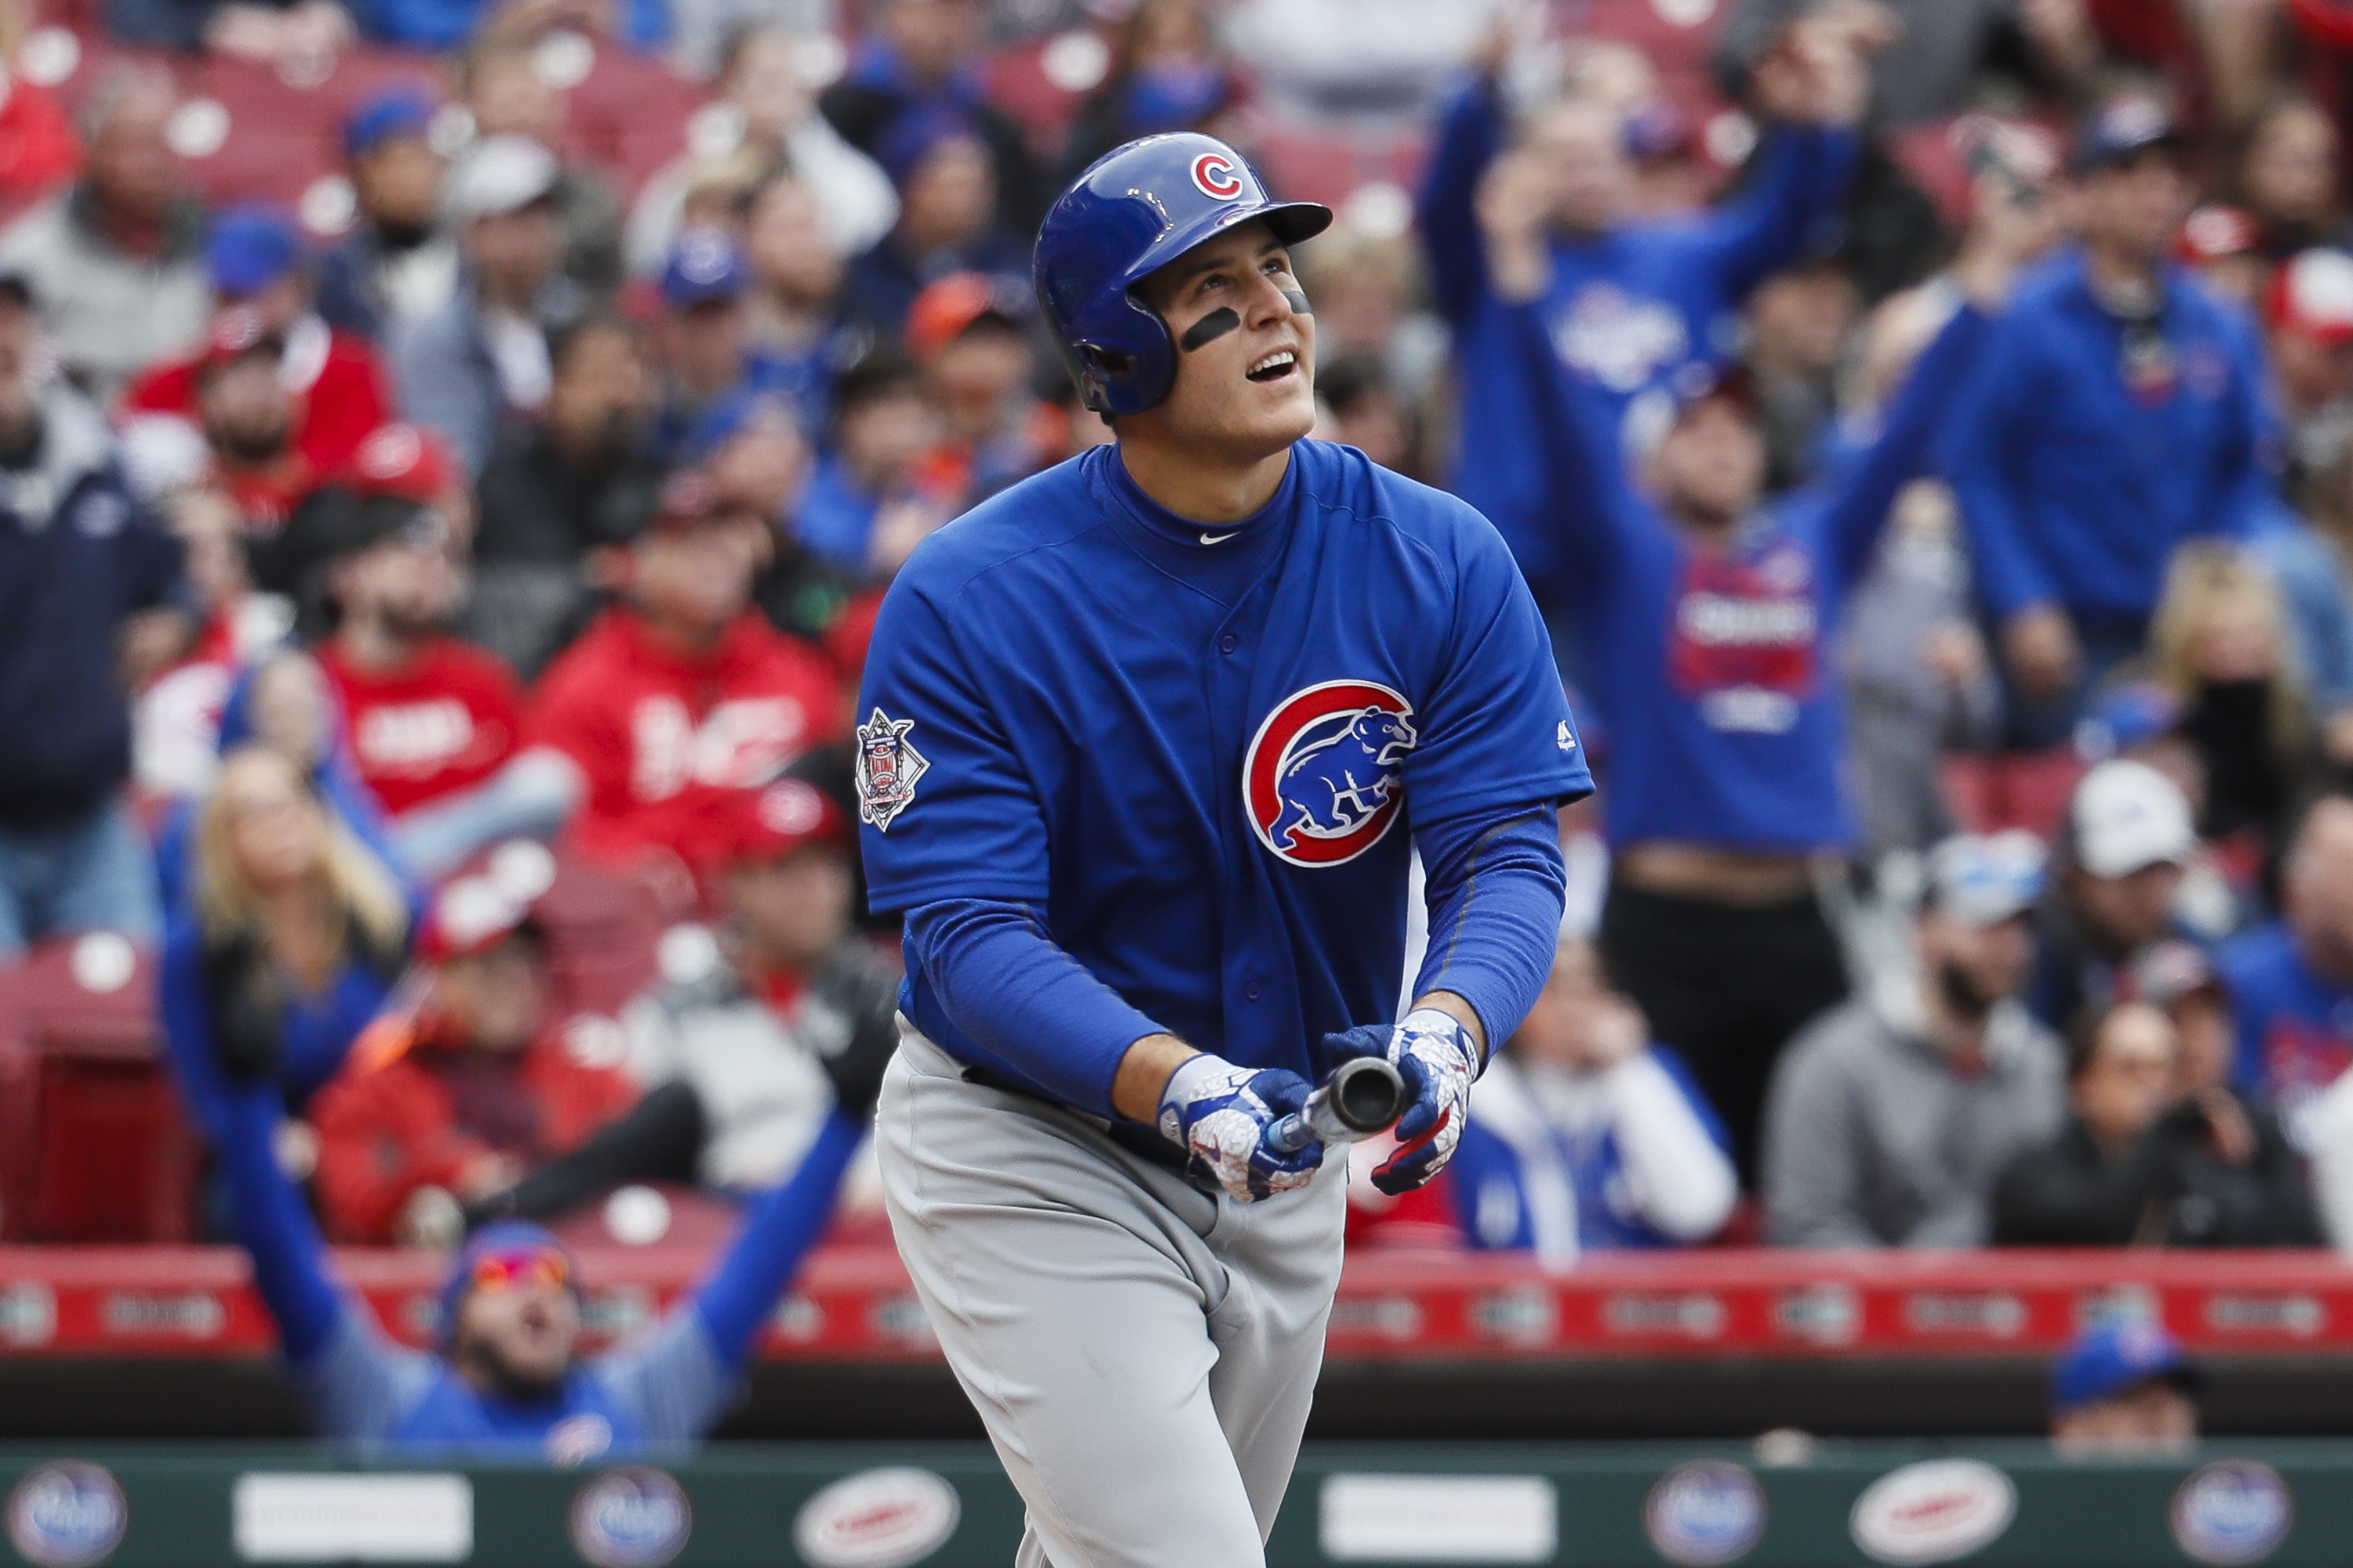 A weekend of sports weddings: Anthony Rizzo marries Emily Vakos